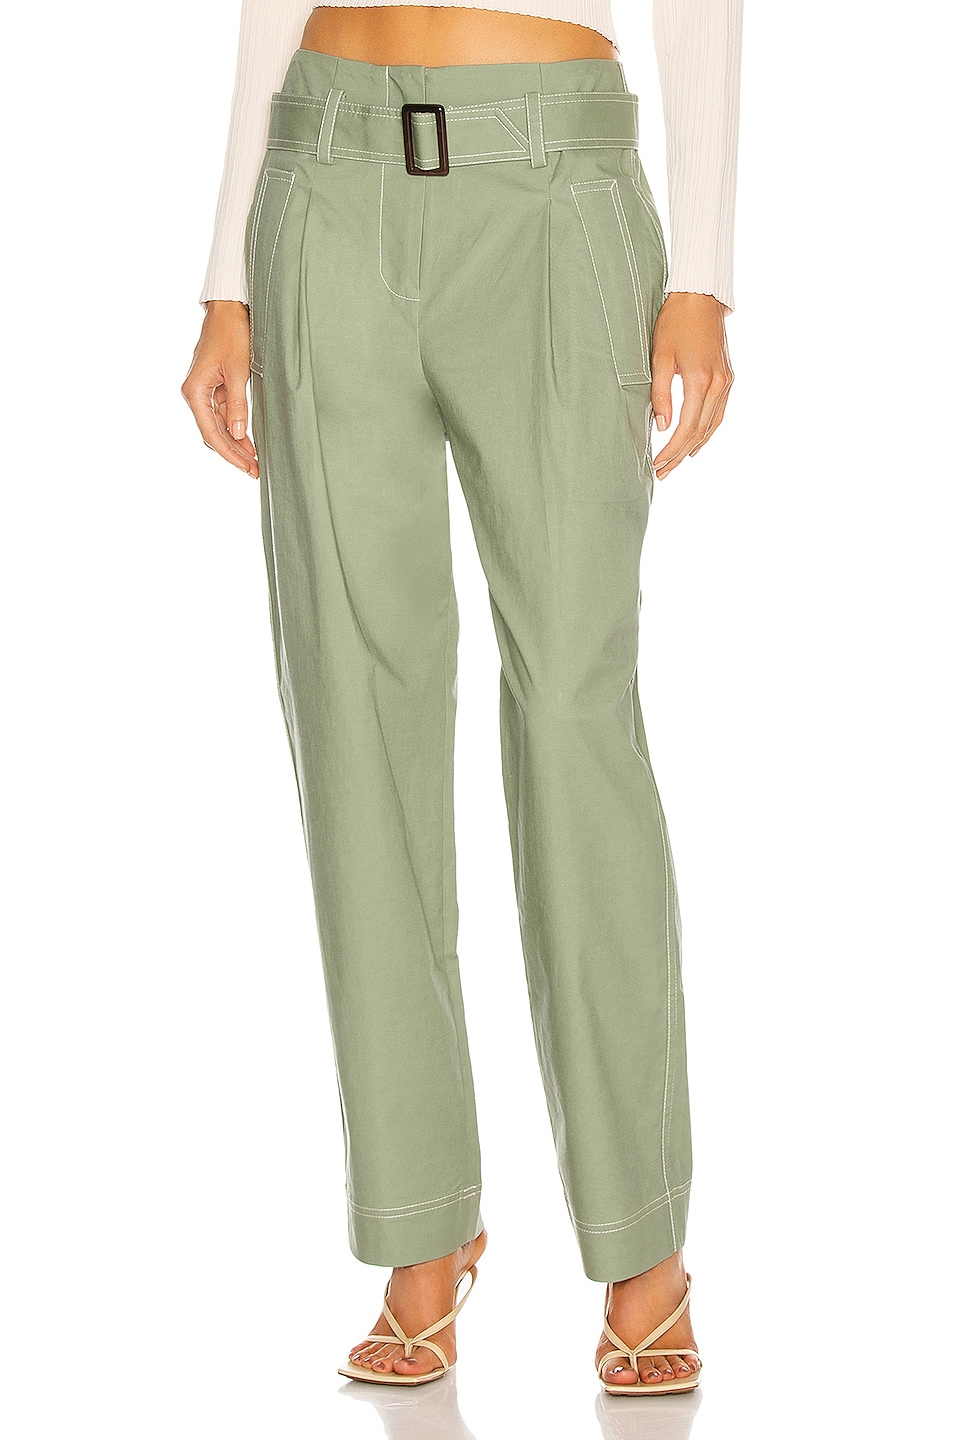 JONATHAN SIMKHAI Belted Trench Pant in Army Green | FWRD